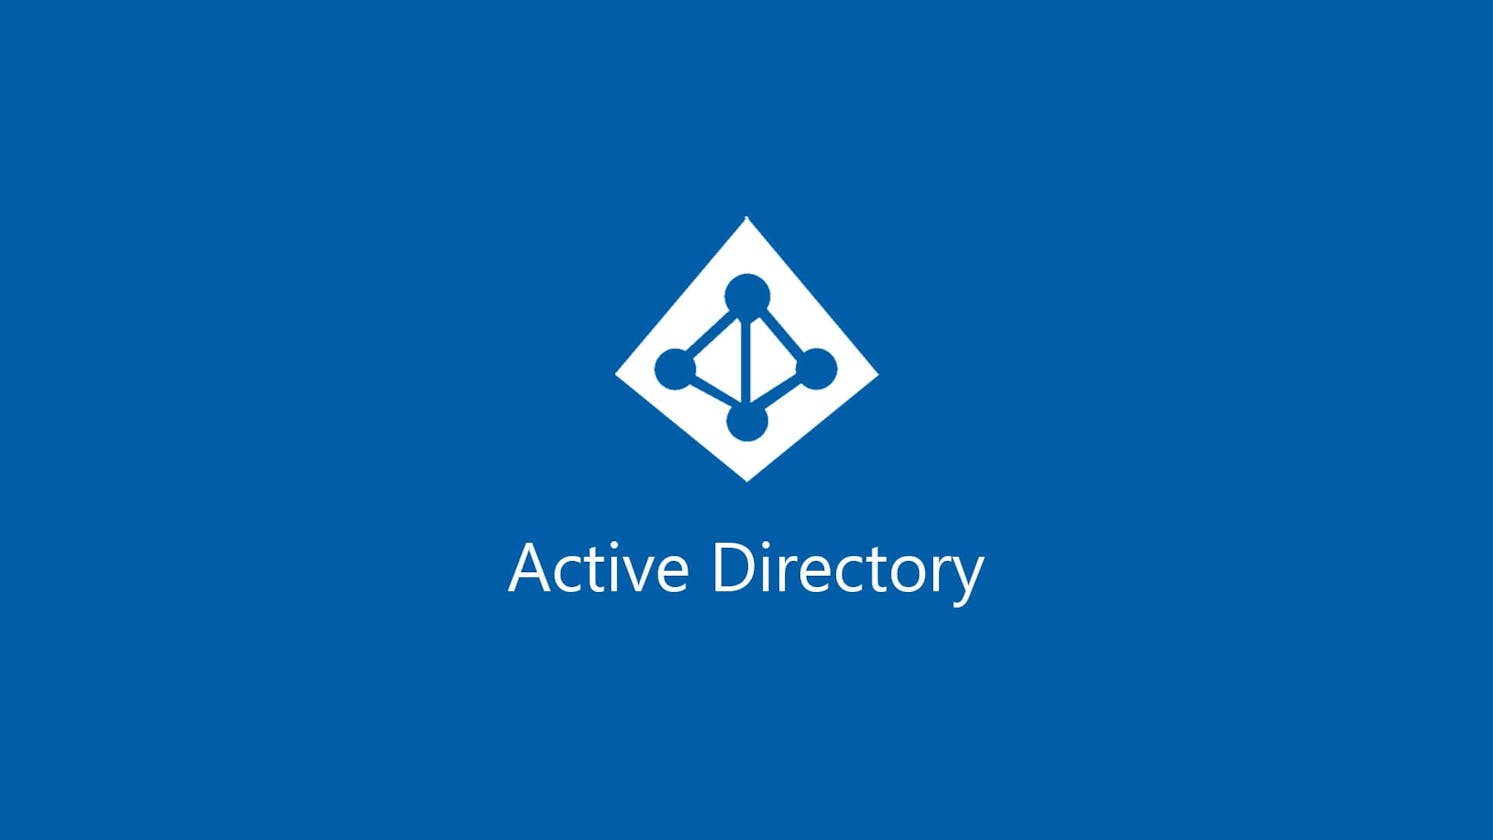 How to Set Up an Active Directory Lab